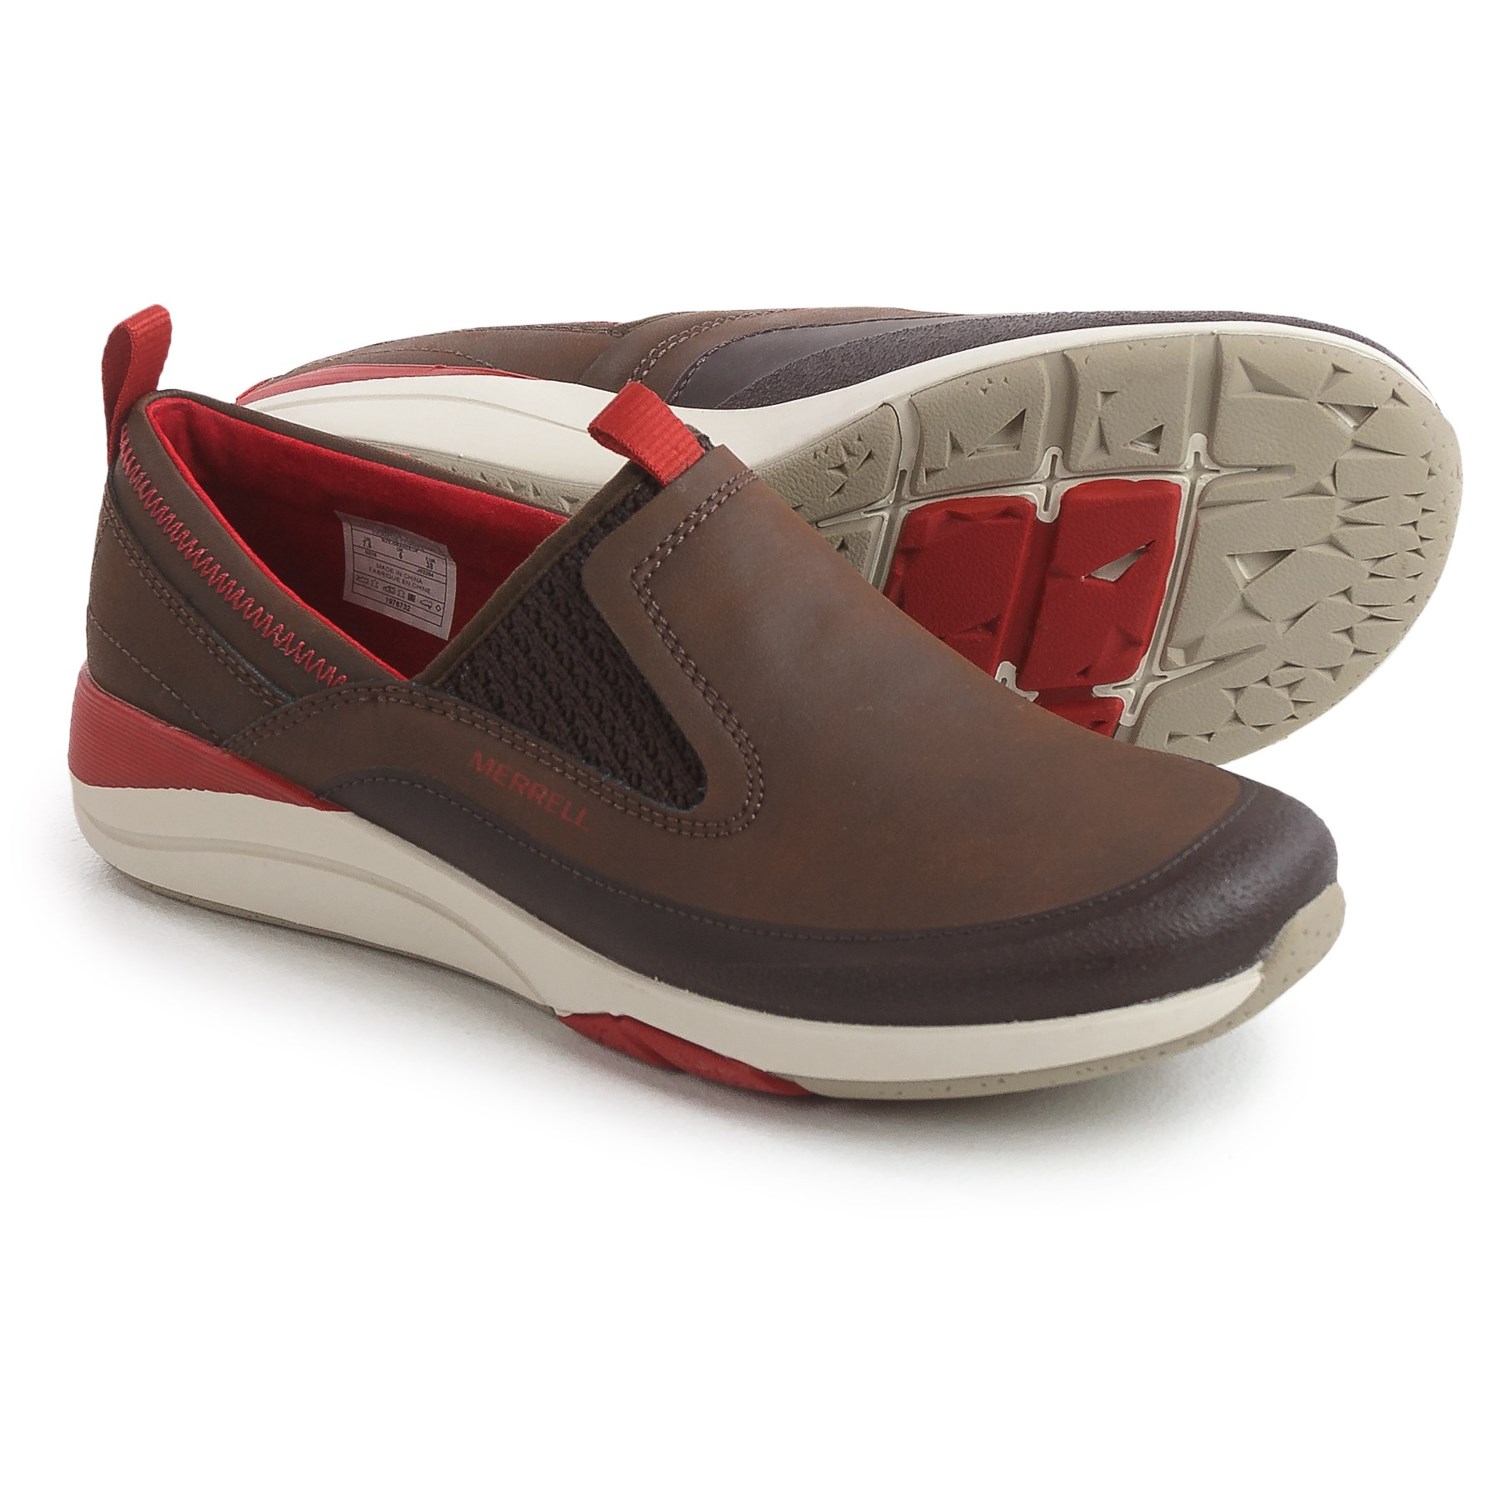 Merrell Applaud Moc Shoes (For Women) - Save 45%